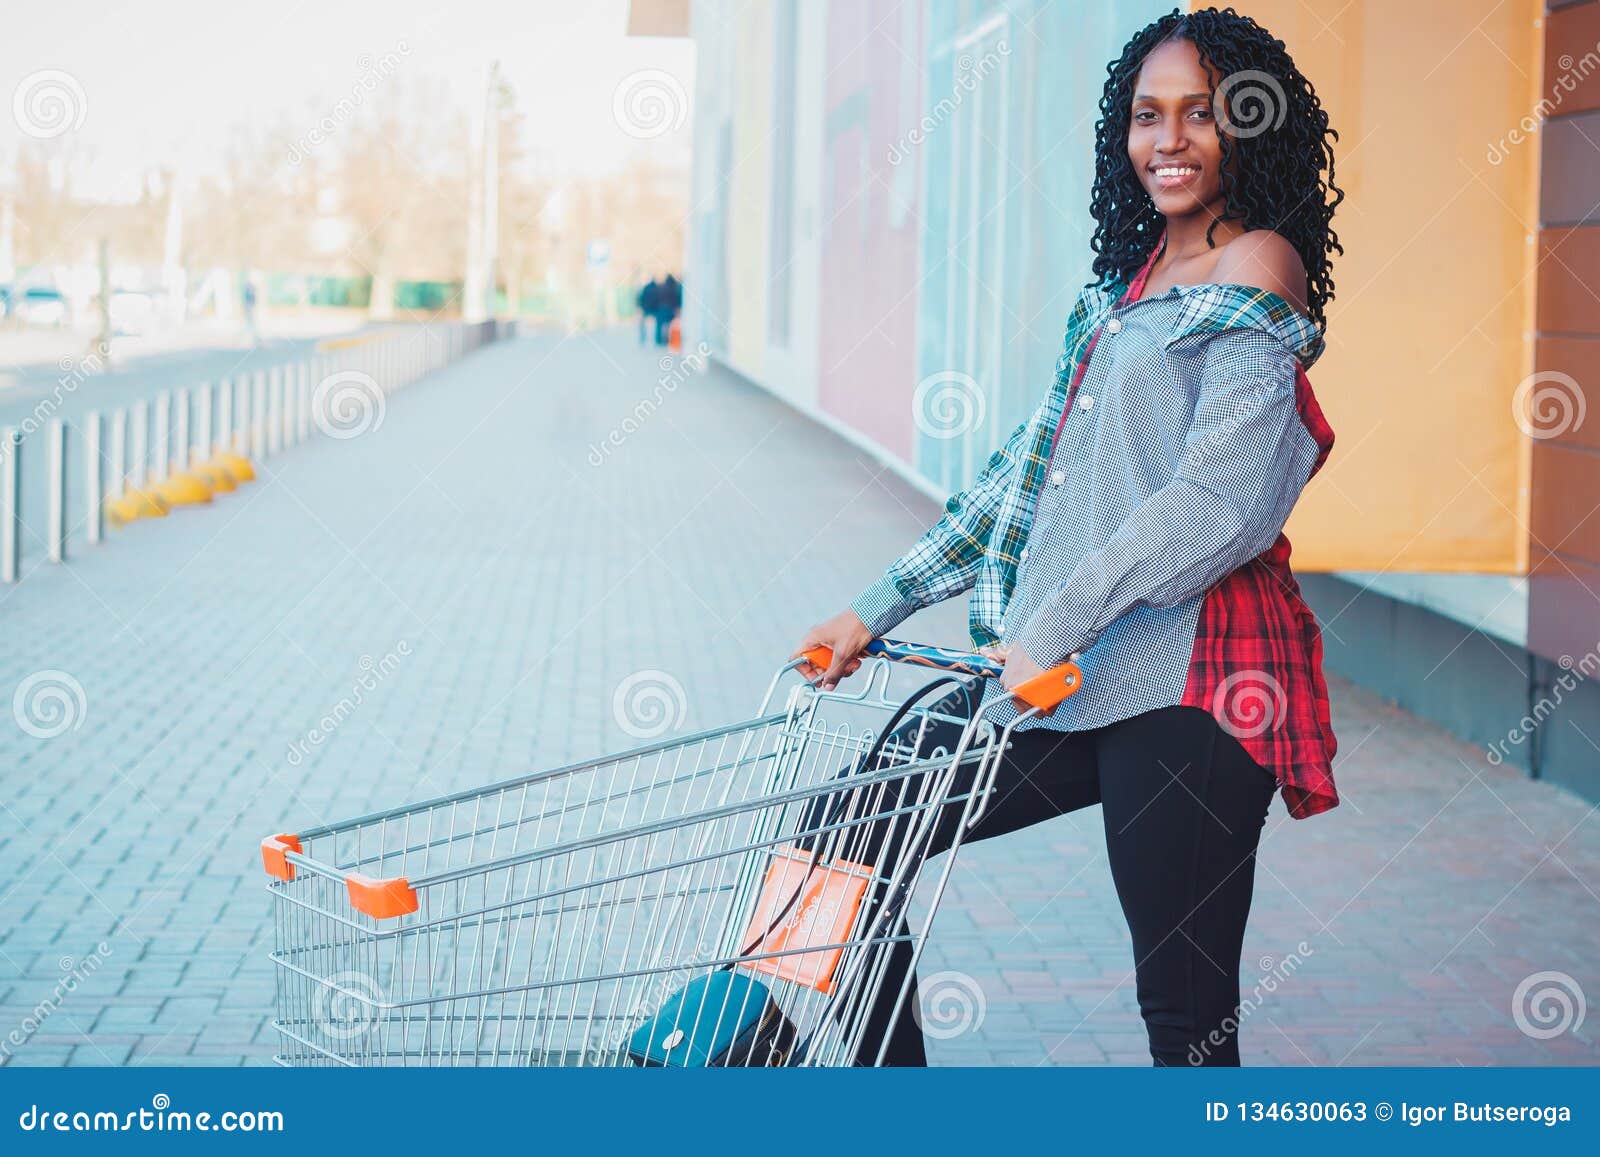 Young Beautiful Woman Dressed in Casual Clothes with a Shopping Cart ...